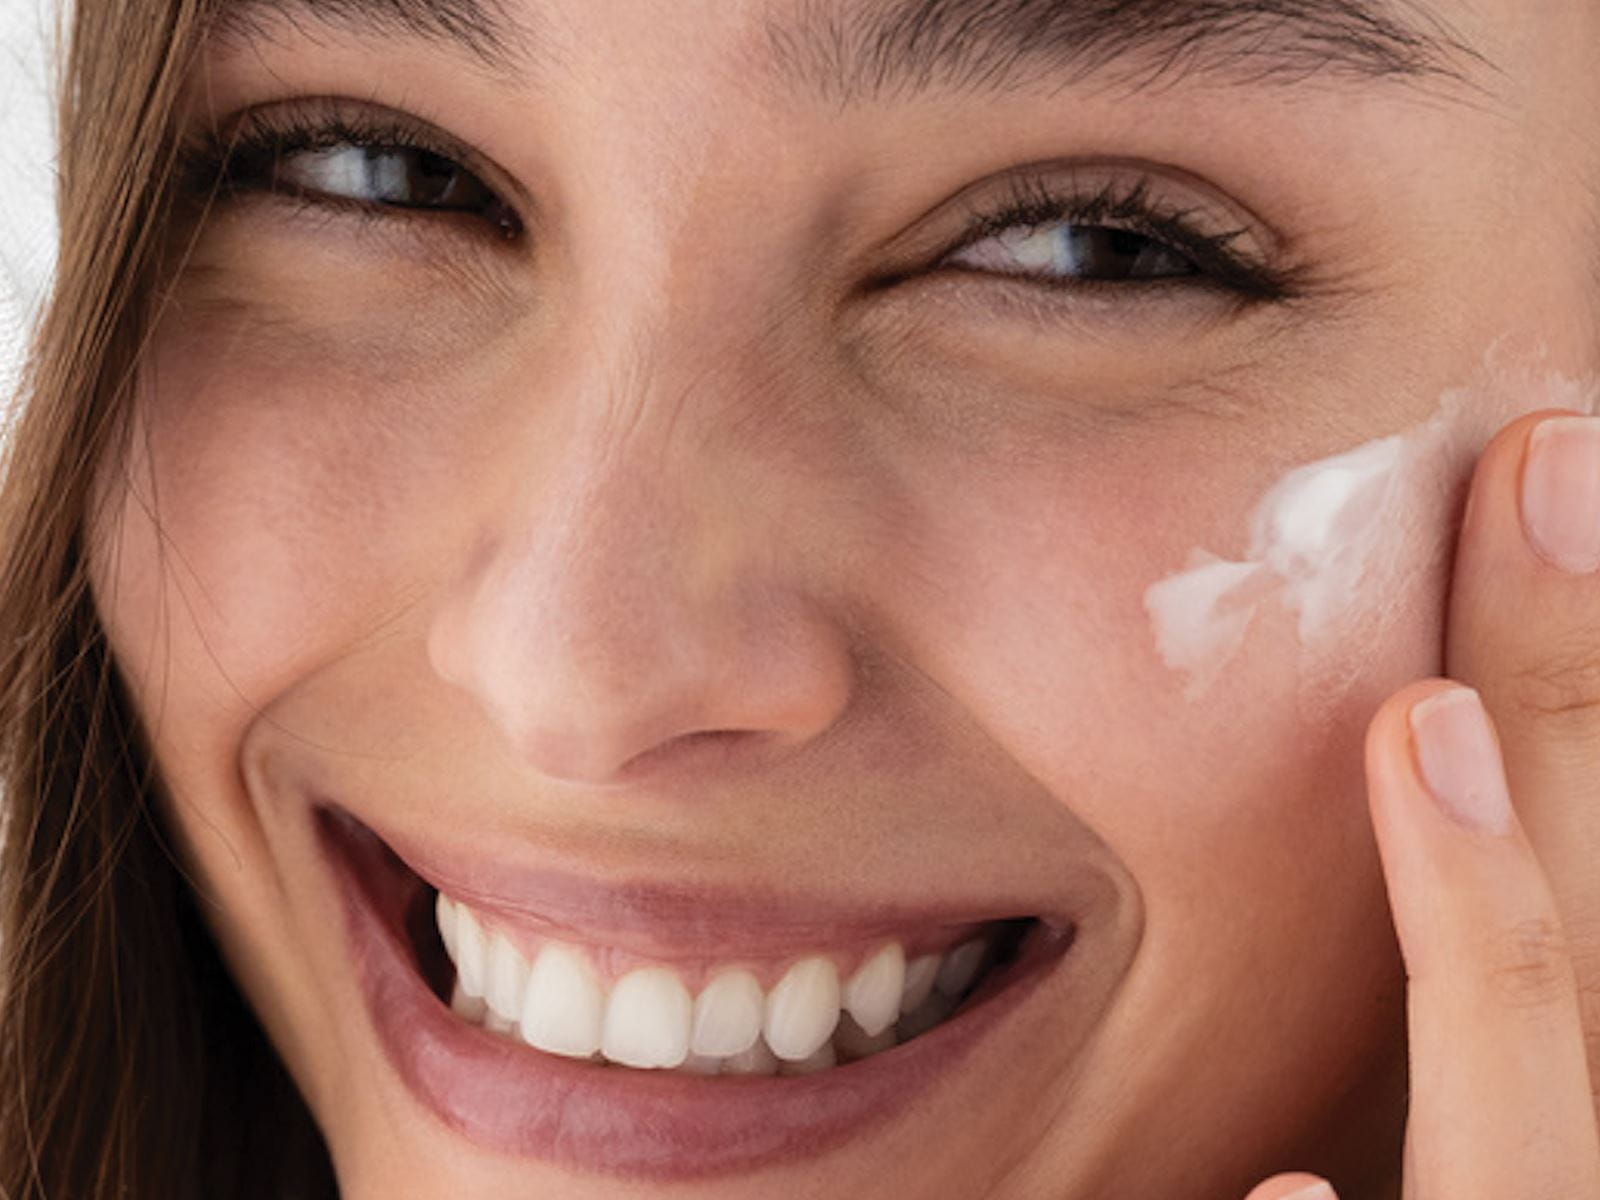 A woman applying cream to her face, her smile radiating contentment.